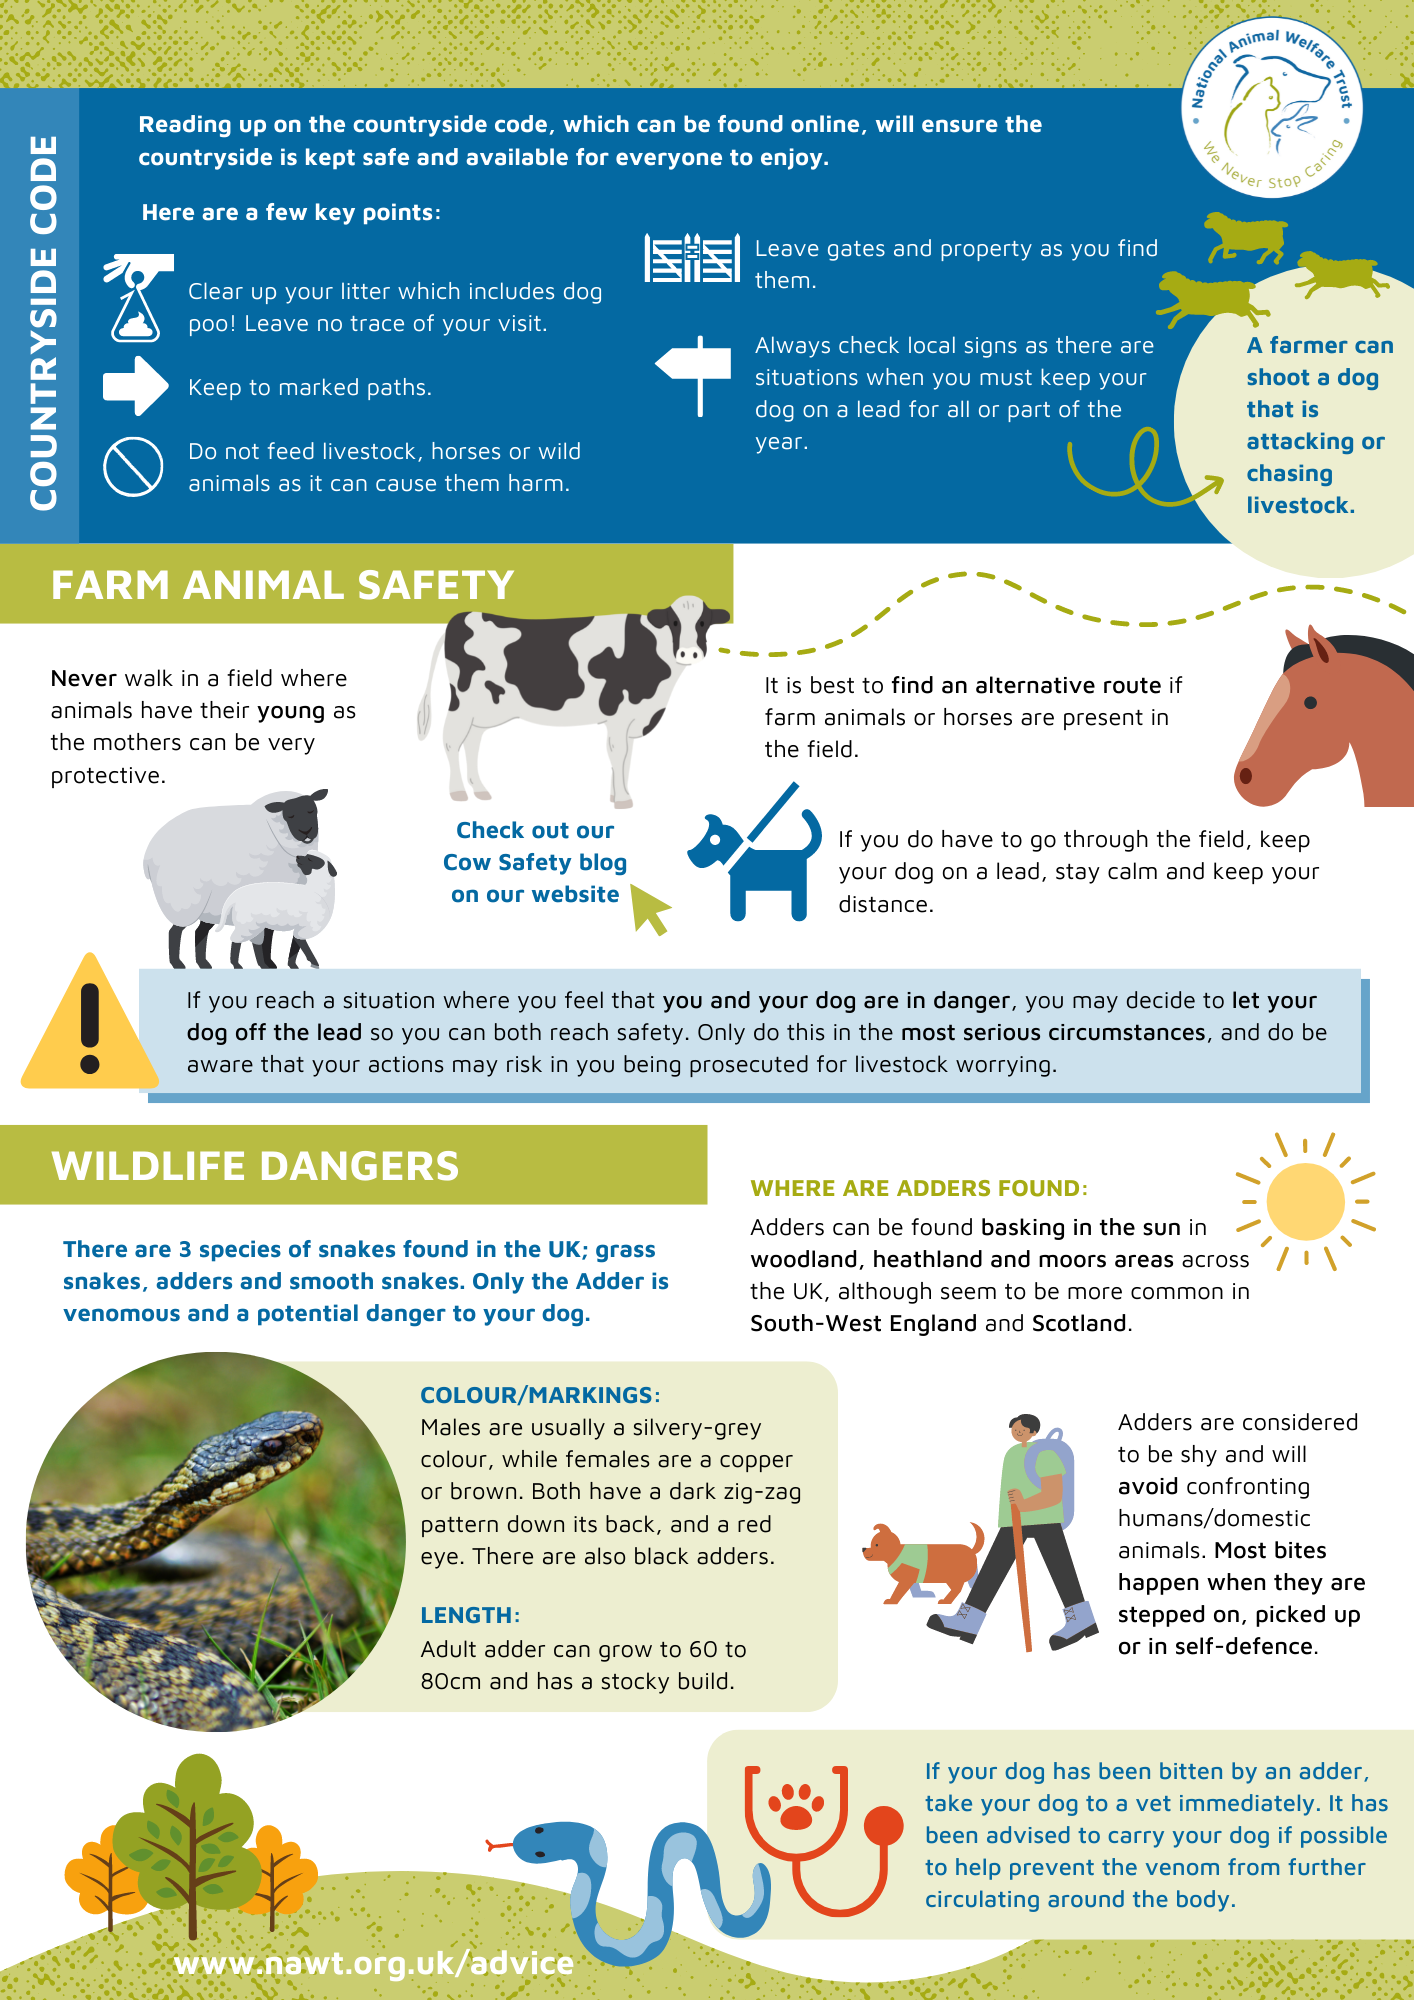 Countryside walking - how to stay safe | National Animal Welfare Trust